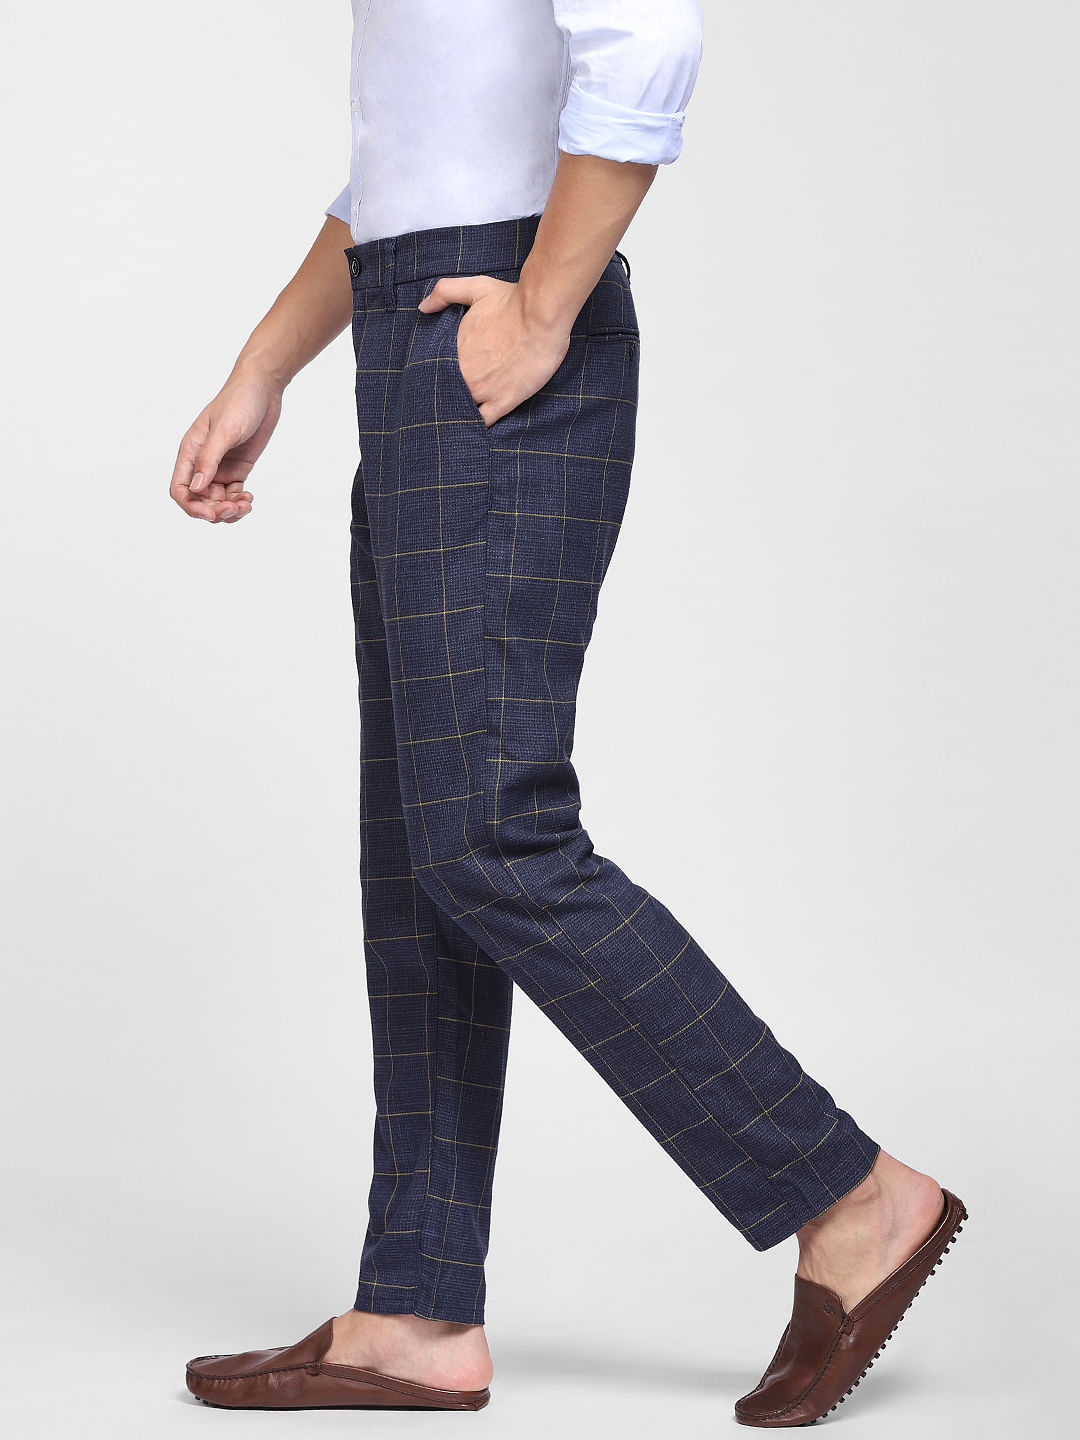 Men's Cotton Blend Navy Blue & Off White Checked Formal Trousers - Sojanya  | Business casual men, Checked trousers, White collared shirt